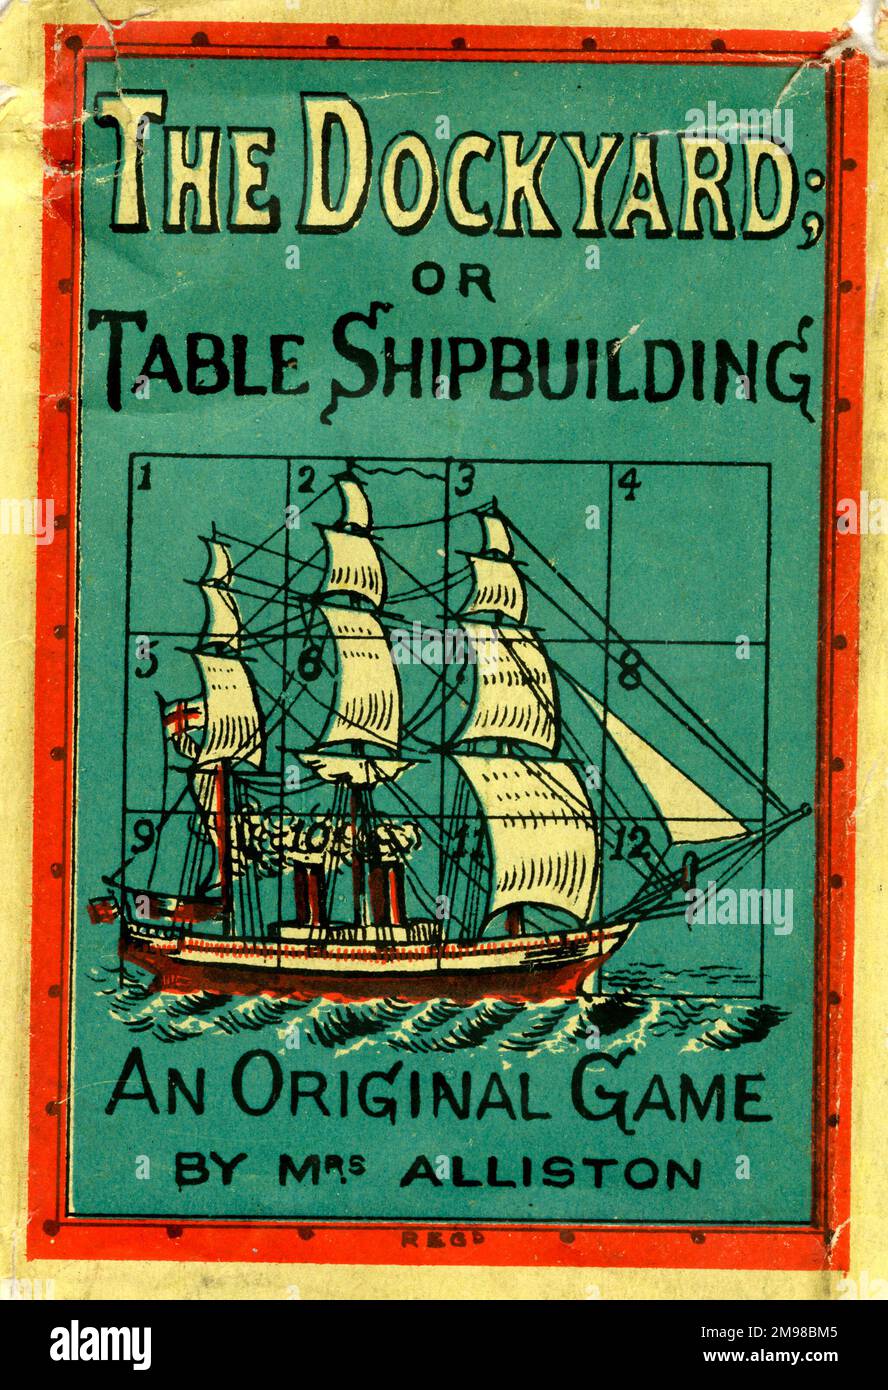 Board game box lid, The Dockyard, or Table Shipbuilding, by Mrs Alliston. Stock Photo